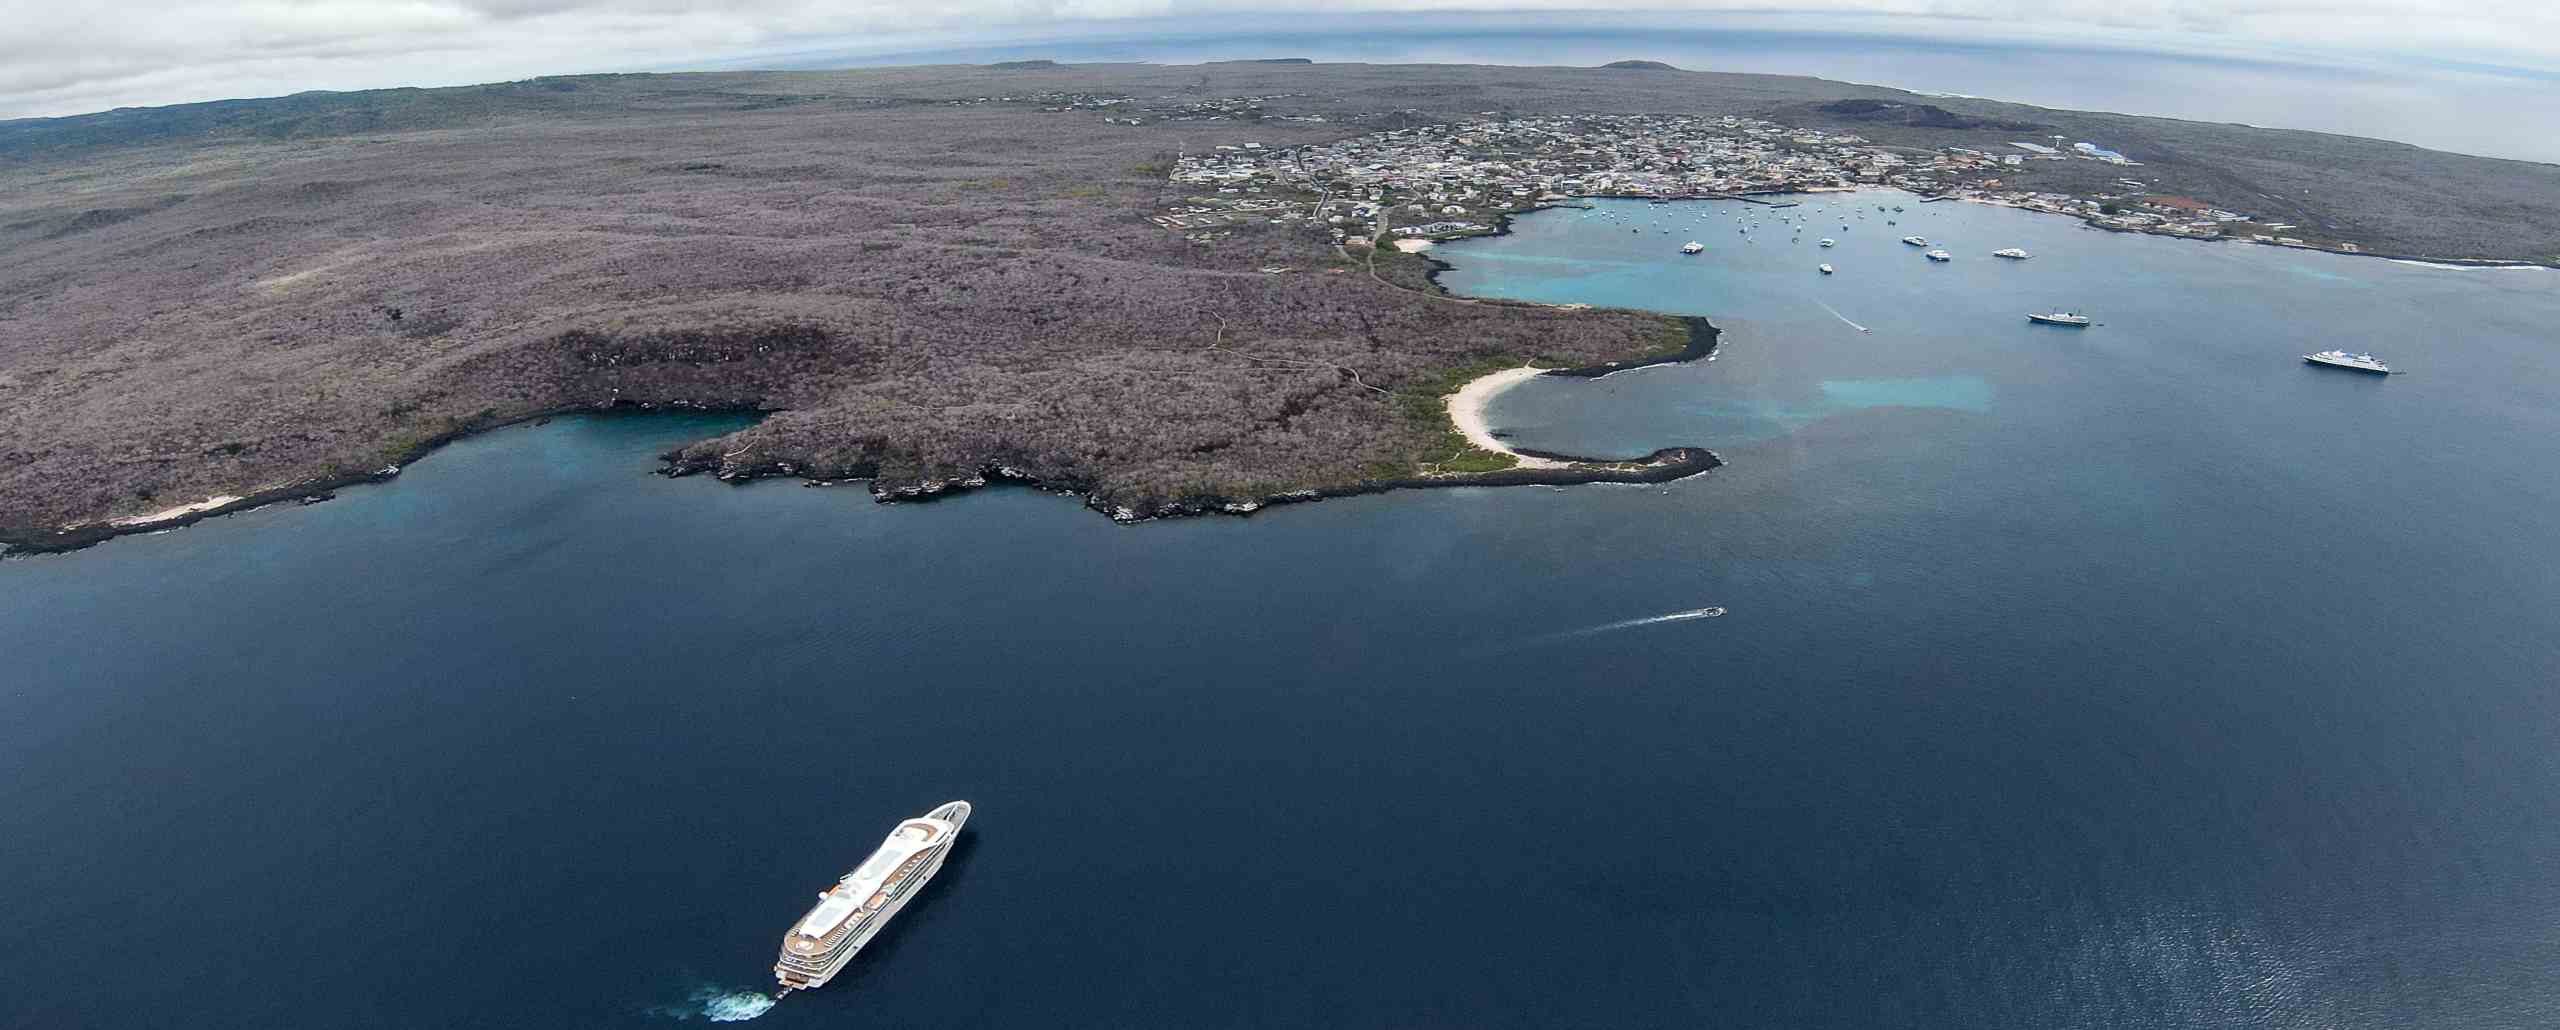 All aboard the Silver Origin, the largest ship sailing the Galapagos